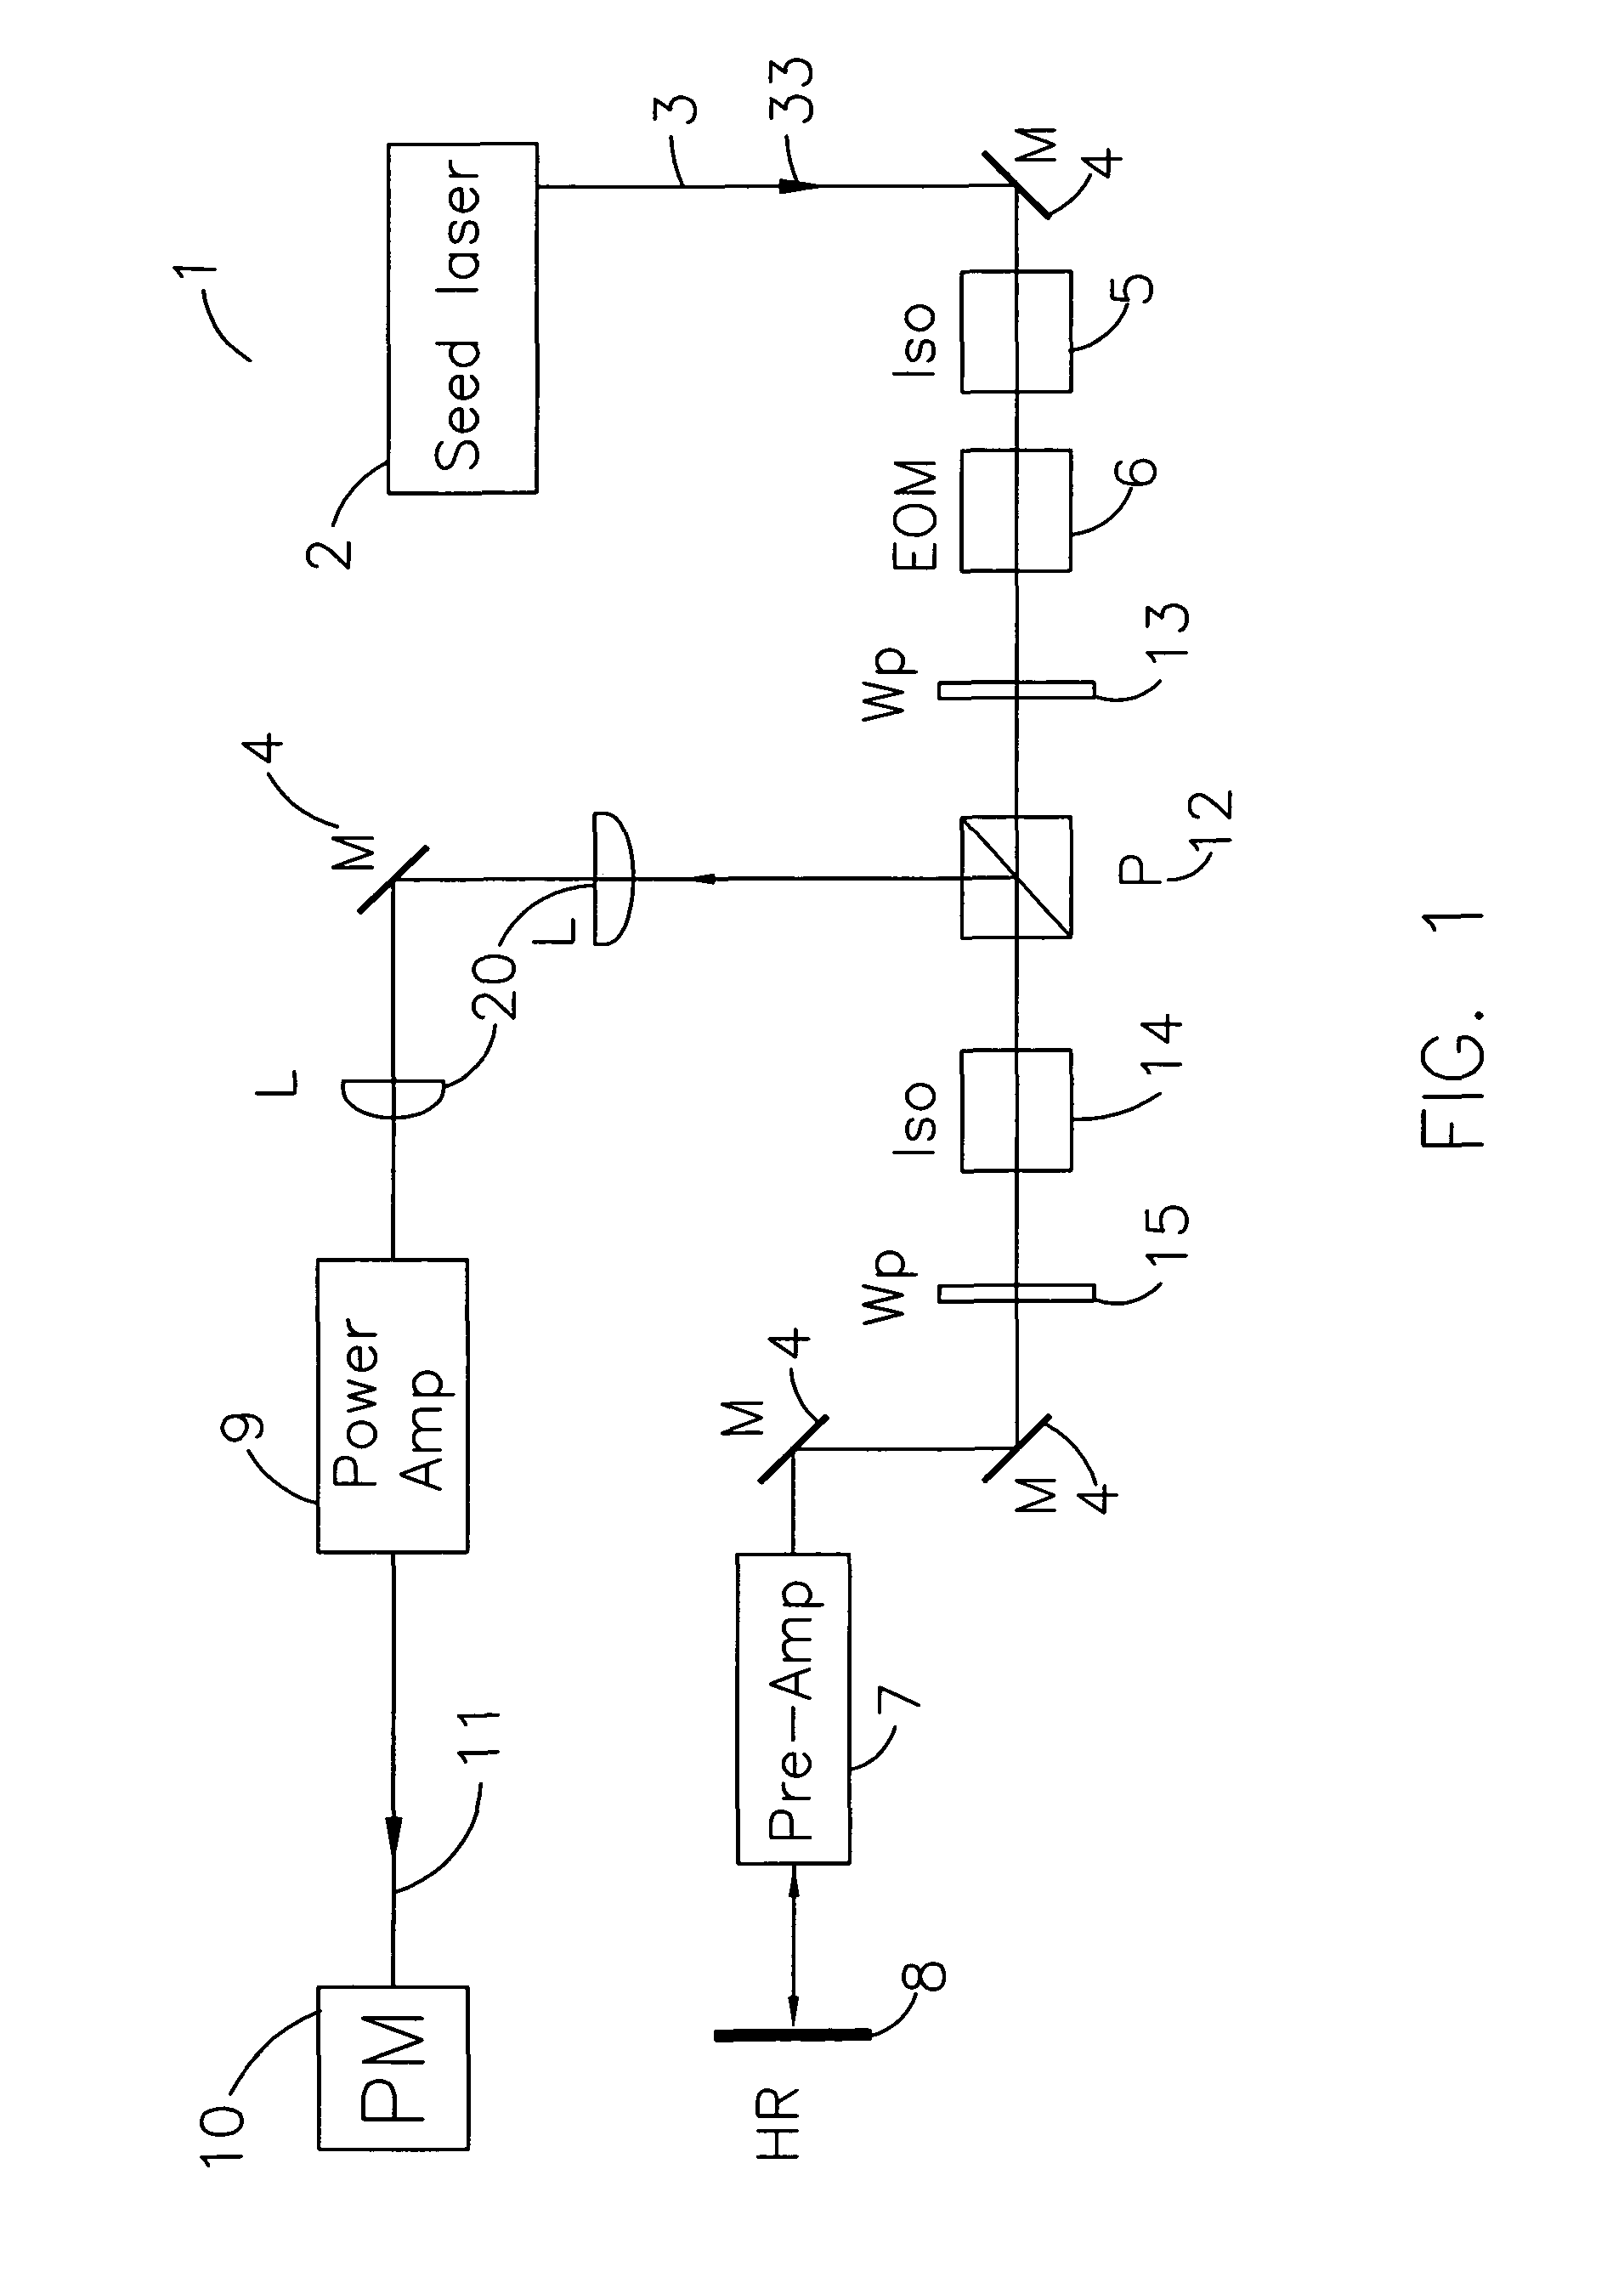 Method for generating high-energy and high repetition rate laser pulses from CW amplifiers